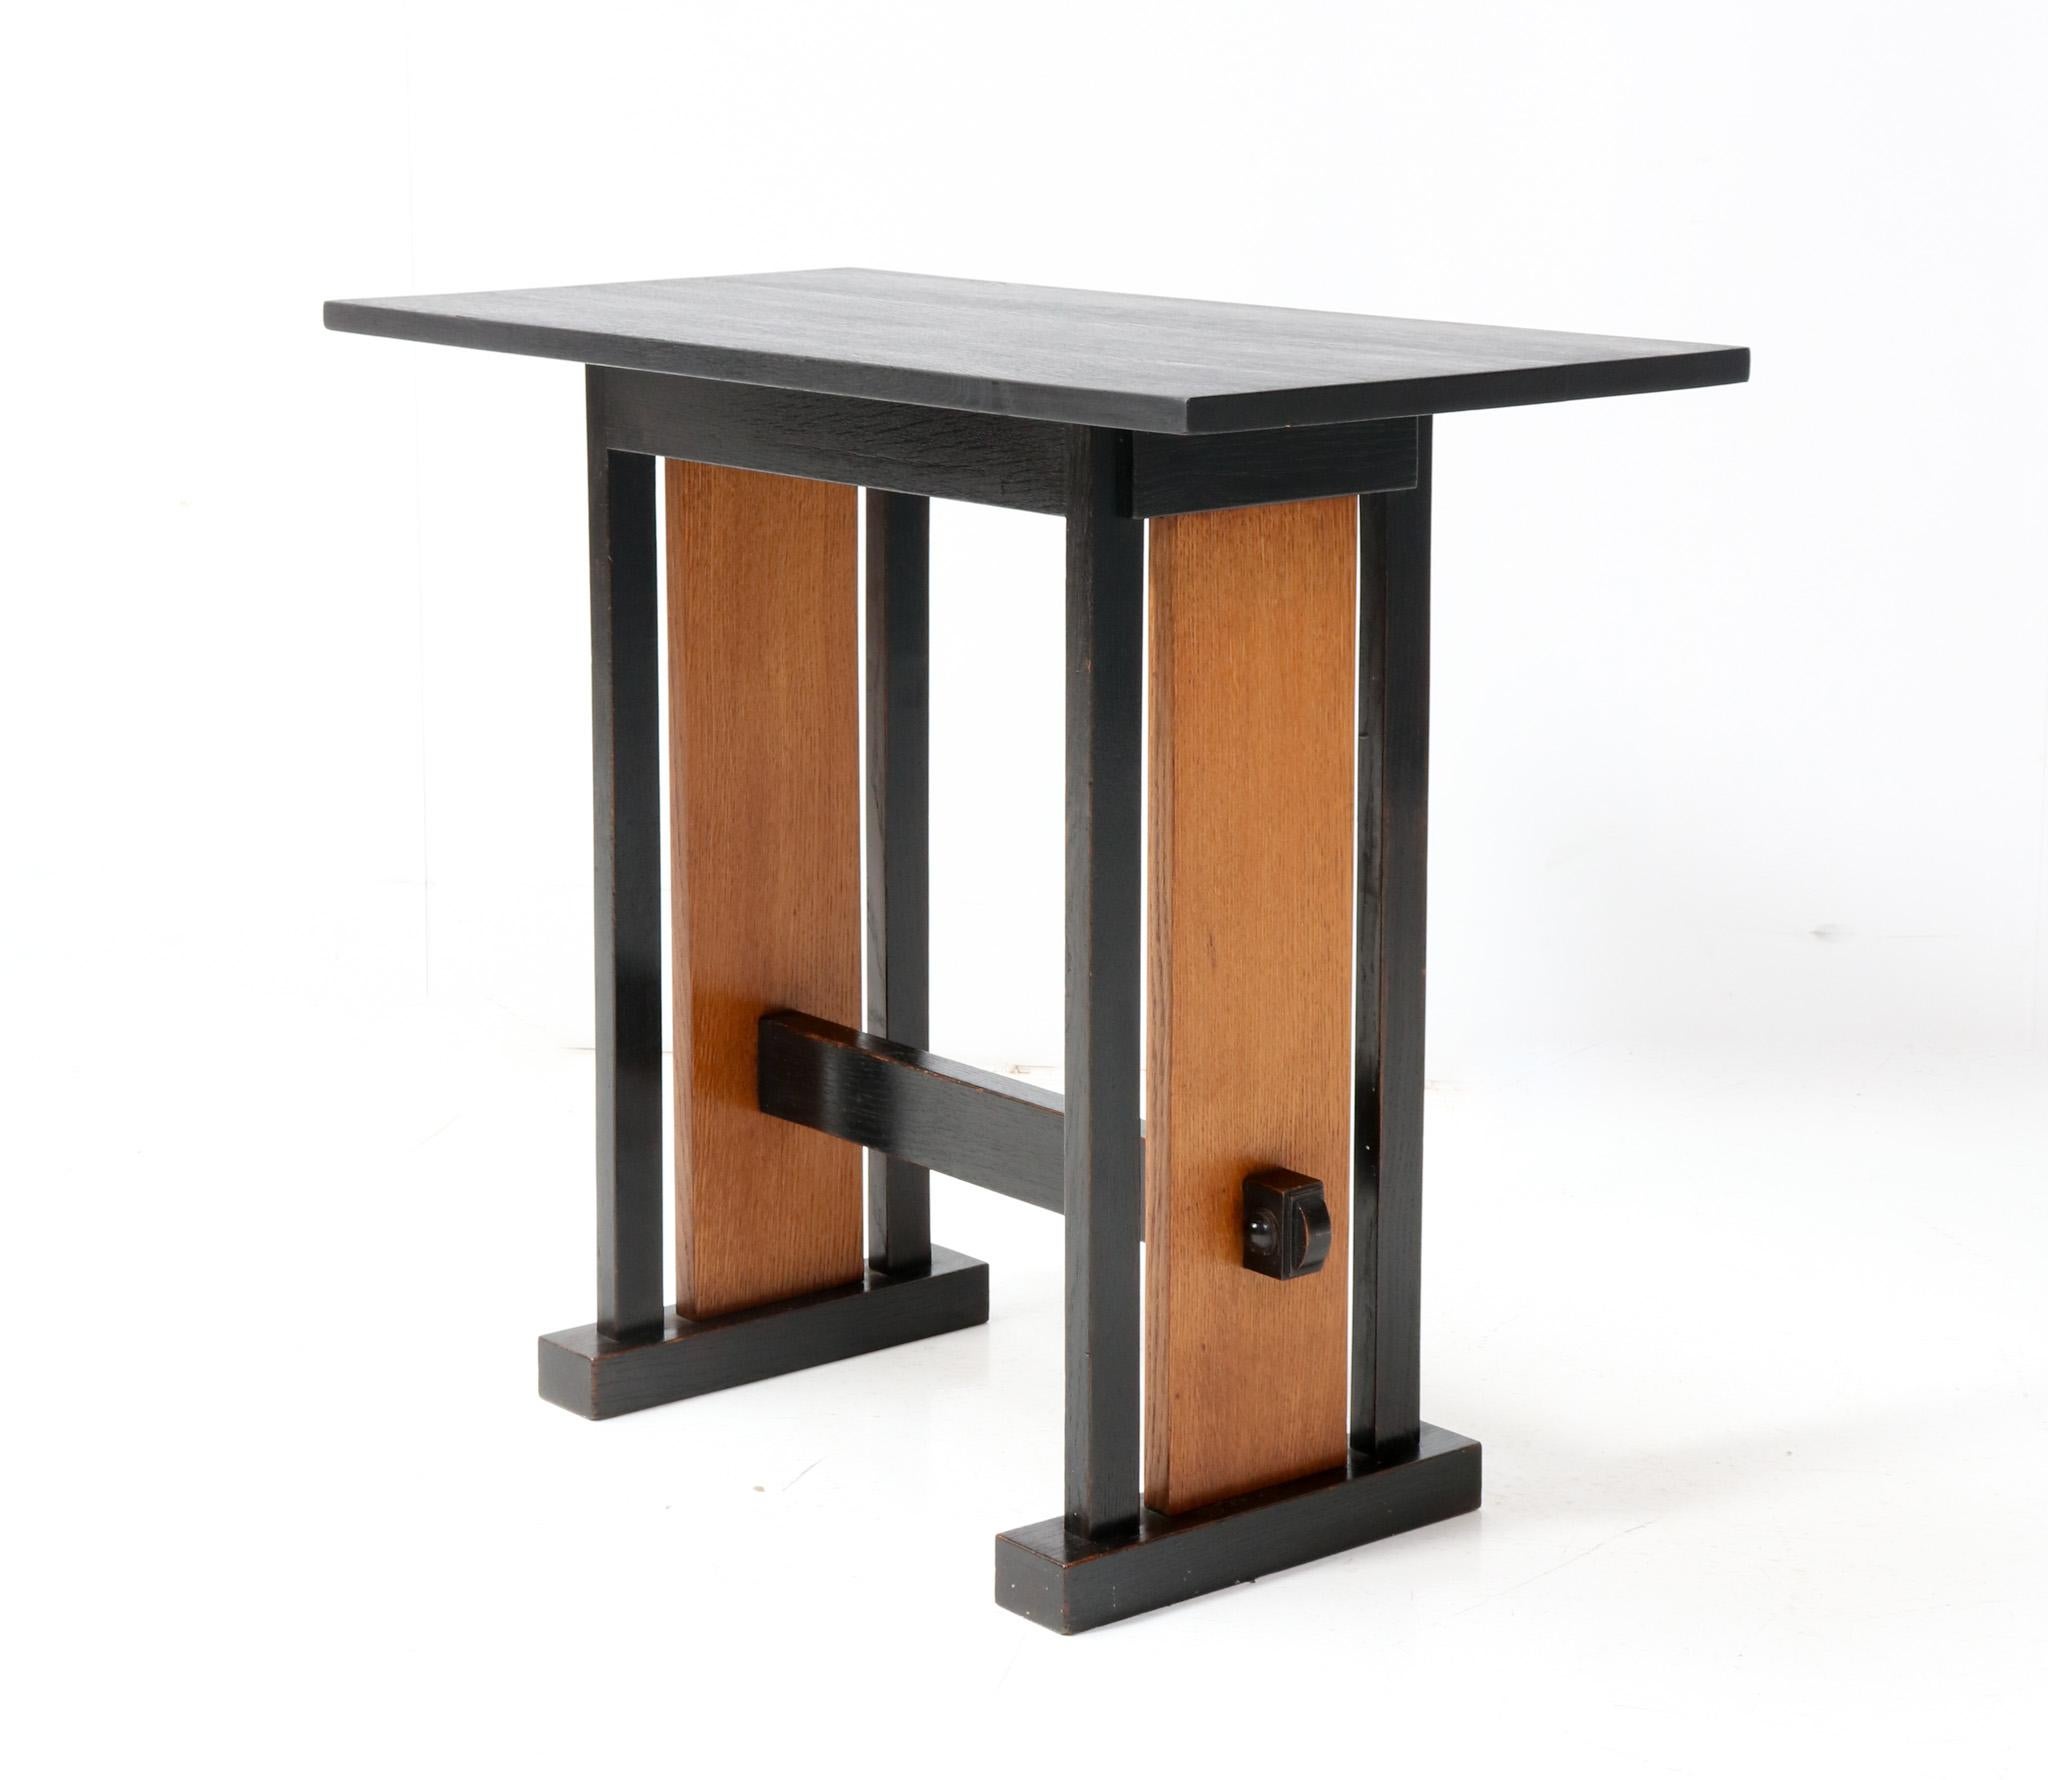 Magnificent and ultra rare Art Deco Modernist side table.
Design by Cor Alons and executed by Fa. Winterkamp & Van Putten.
Striking Dutch design from the 1920s.
Solid oak and black lacquered base with original black lacquered refinished top.
In very